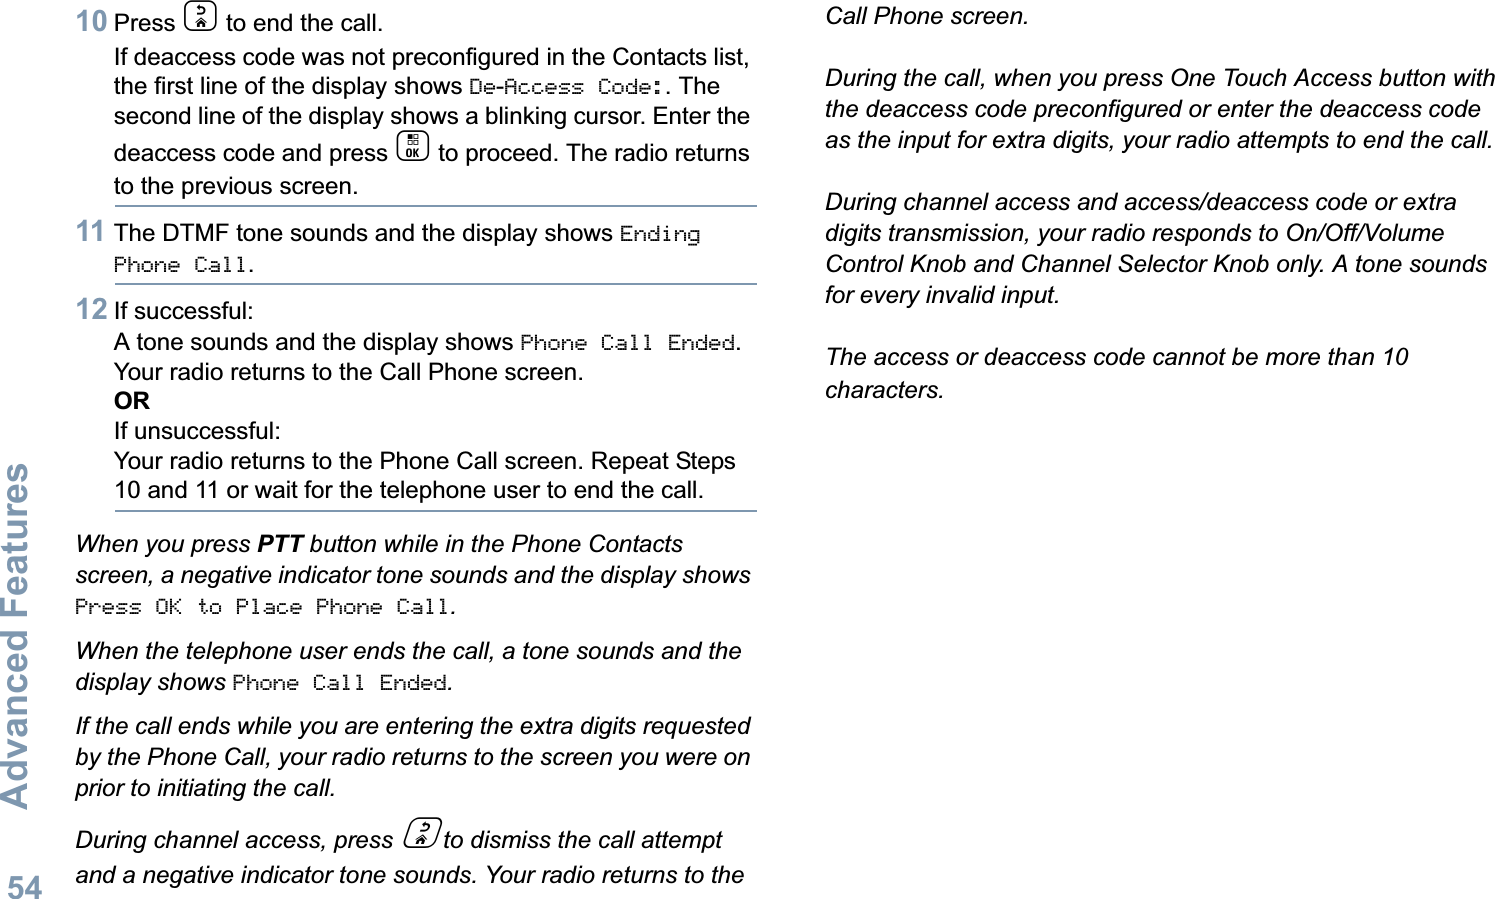 Advanced FeaturesEnglish5410 Press d to end the call.If deaccess code was not preconfigured in the Contacts list, the first line of the display shows De-Access Code:. The second line of the display shows a blinking cursor. Enter the deaccess code and press c to proceed. The radio returns to the previous screen.11 The DTMF tone sounds and the display shows Ending Phone Call.12 If successful:A tone sounds and the display shows Phone Call Ended. Your radio returns to the Call Phone screen.ORIf unsuccessful:Your radio returns to the Phone Call screen. Repeat Steps 10 and 11 or wait for the telephone user to end the call.When you press PTT button while in the Phone Contacts screen, a negative indicator tone sounds and the display shows Press OK to Place Phone Call.When the telephone user ends the call, a tone sounds and the display shows Phone Call Ended.If the call ends while you are entering the extra digits requested by the Phone Call, your radio returns to the screen you were on prior to initiating the call.During channel access, press d to dismiss the call attempt and a negative indicator tone sounds. Your radio returns to the Call Phone screen.During the call, when you press One Touch Access button with the deaccess code preconfigured or enter the deaccess code as the input for extra digits, your radio attempts to end the call.During channel access and access/deaccess code or extra digits transmission, your radio responds to On/Off/Volume Control Knob and Channel Selector Knob only. A tone sounds for every invalid input.The access or deaccess code cannot be more than 10 characters.